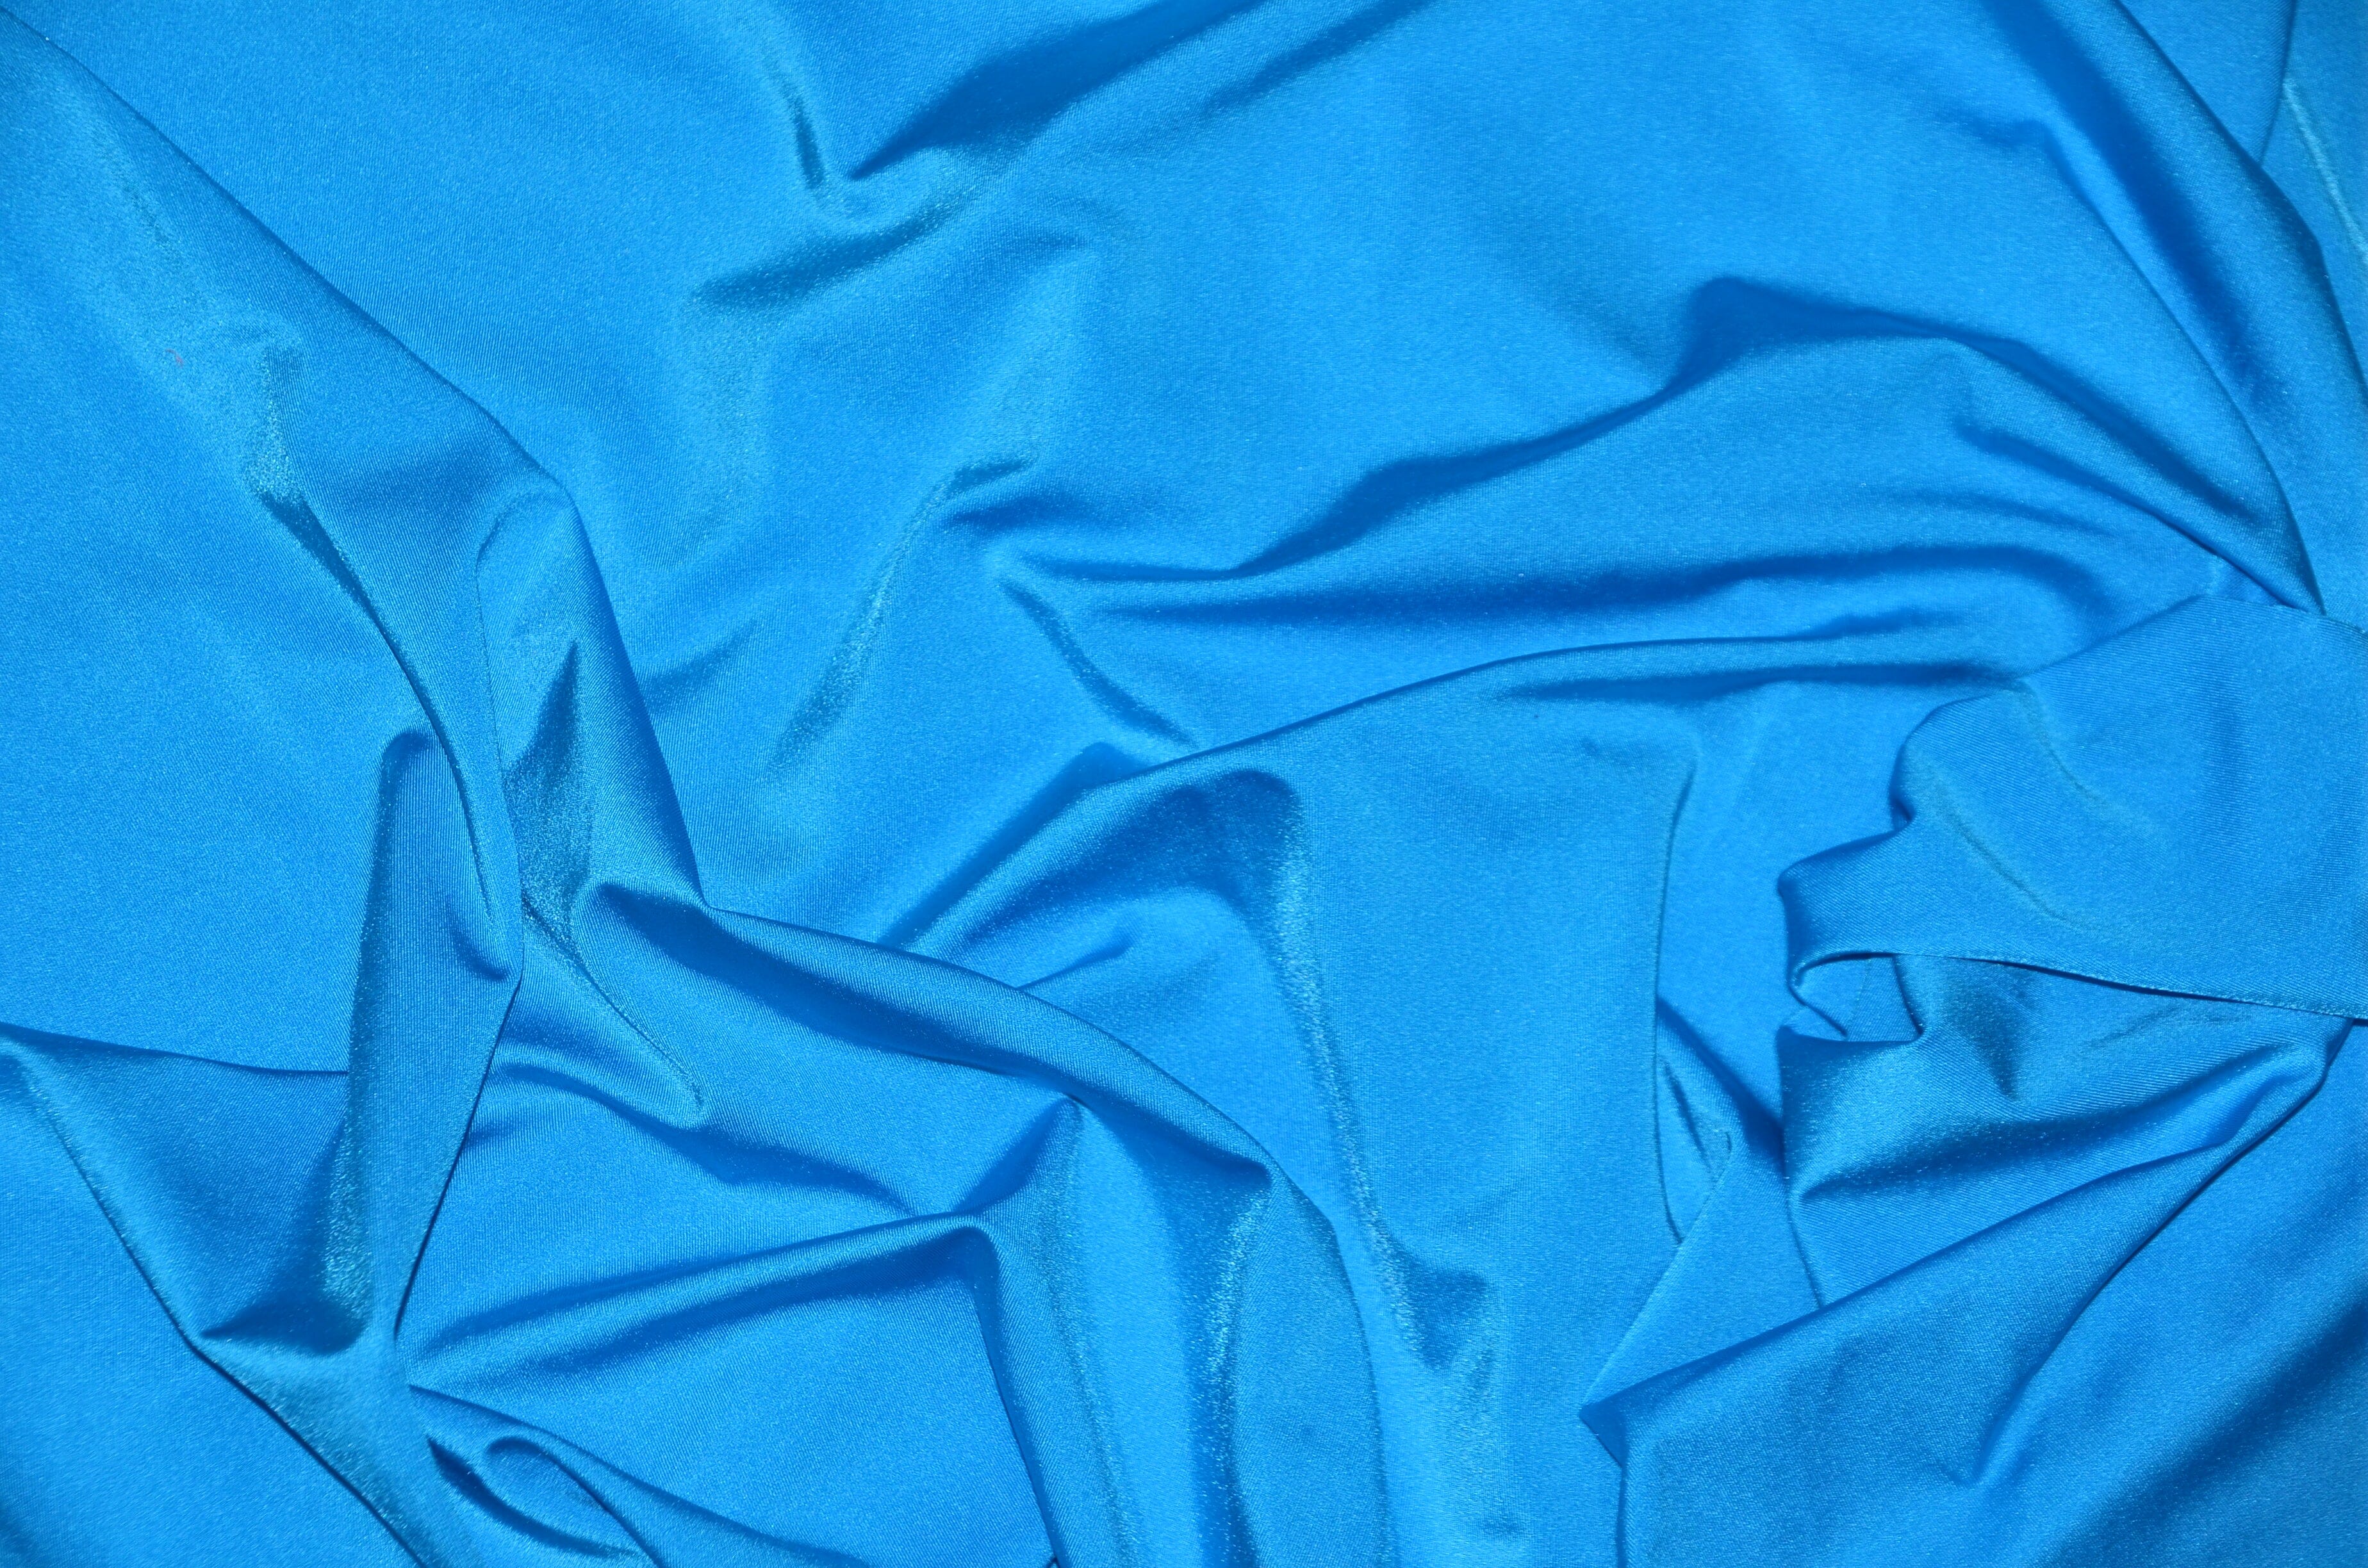 Nylon Spandex 4 Way Stretch Fabric | 60" Width | Great for Swimwear, Dancewear, Waterproof, Tablecloths, Chair Covers | Multiple Colors | Fabric mytextilefabric Yards Turquoise 